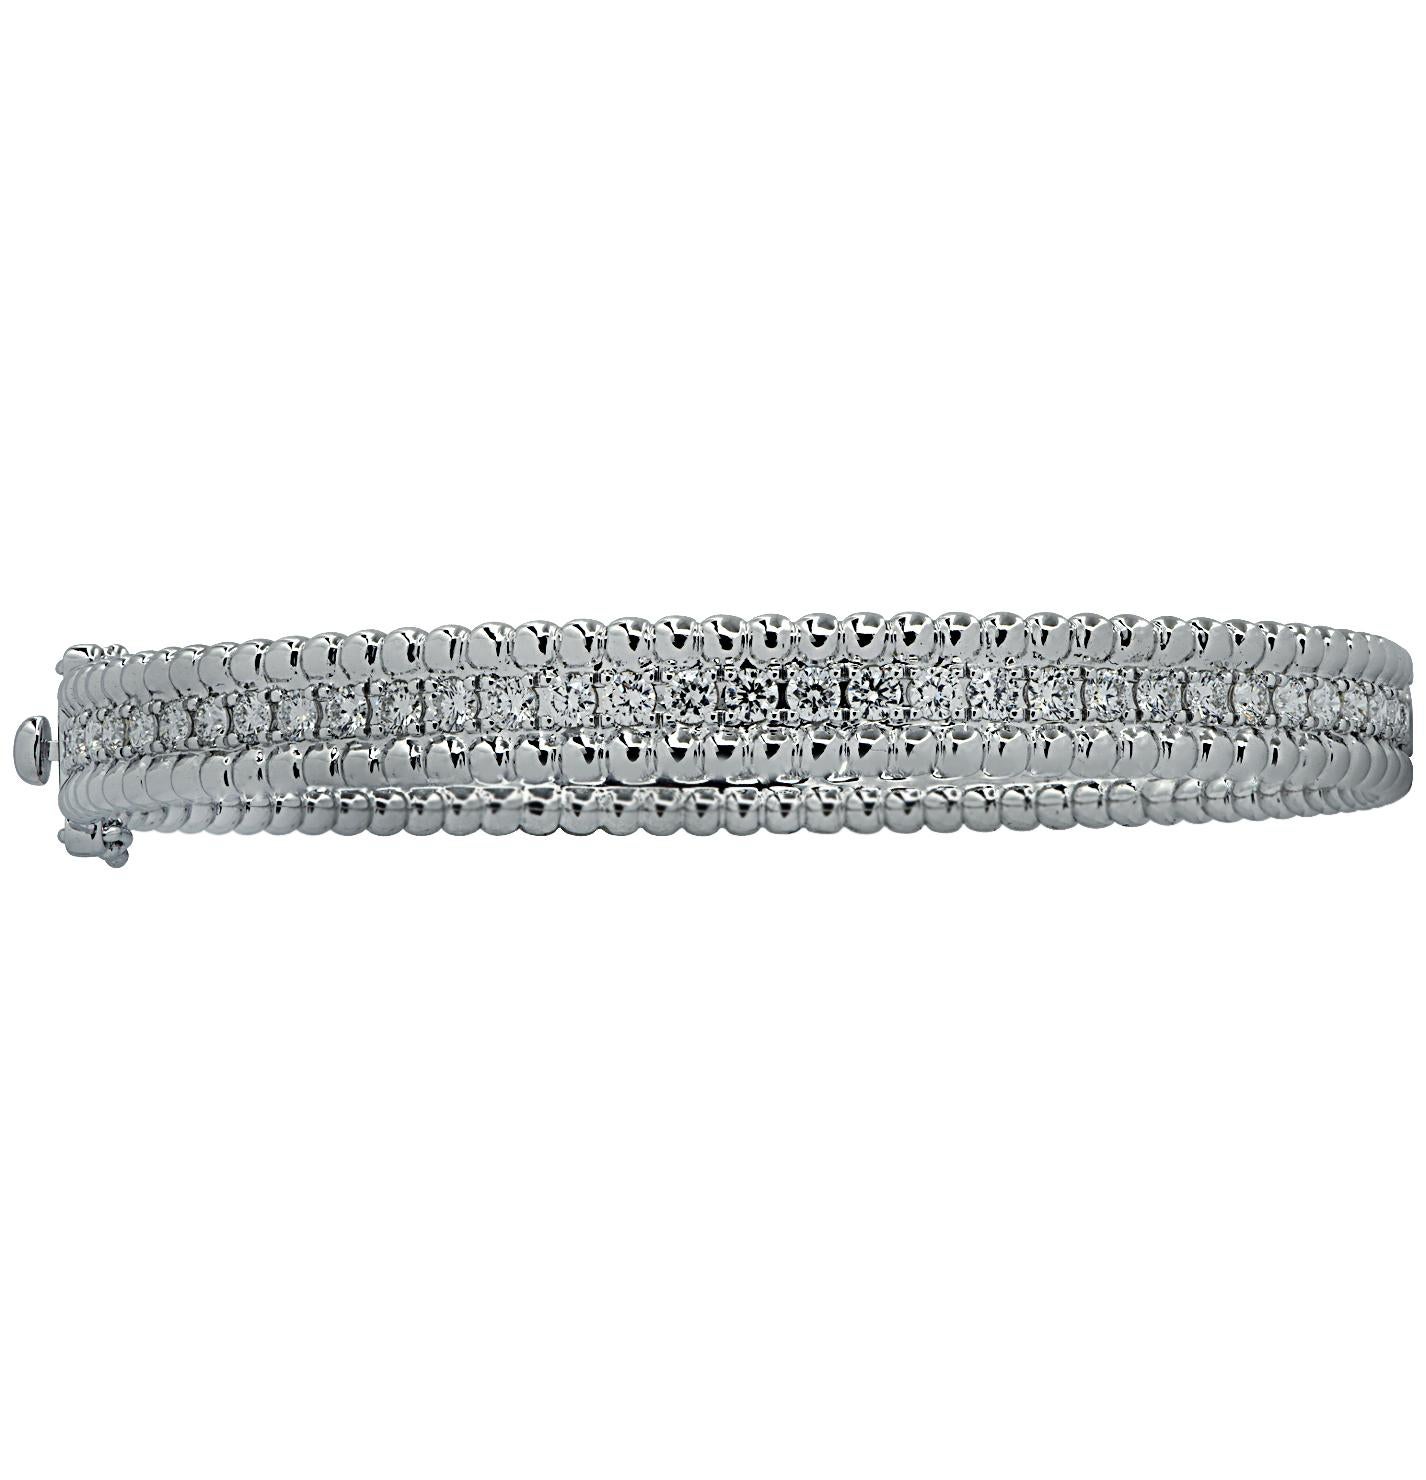 Stunning Vivid Diamonds Bangle Bracelet crafted in white gold, featuring 64 round brilliant cut diamonds weighing 2.79 carats total, F color, VS-SI clarity. This spectacular bangle is set with a row of diamonds, laced with gold beads creating a